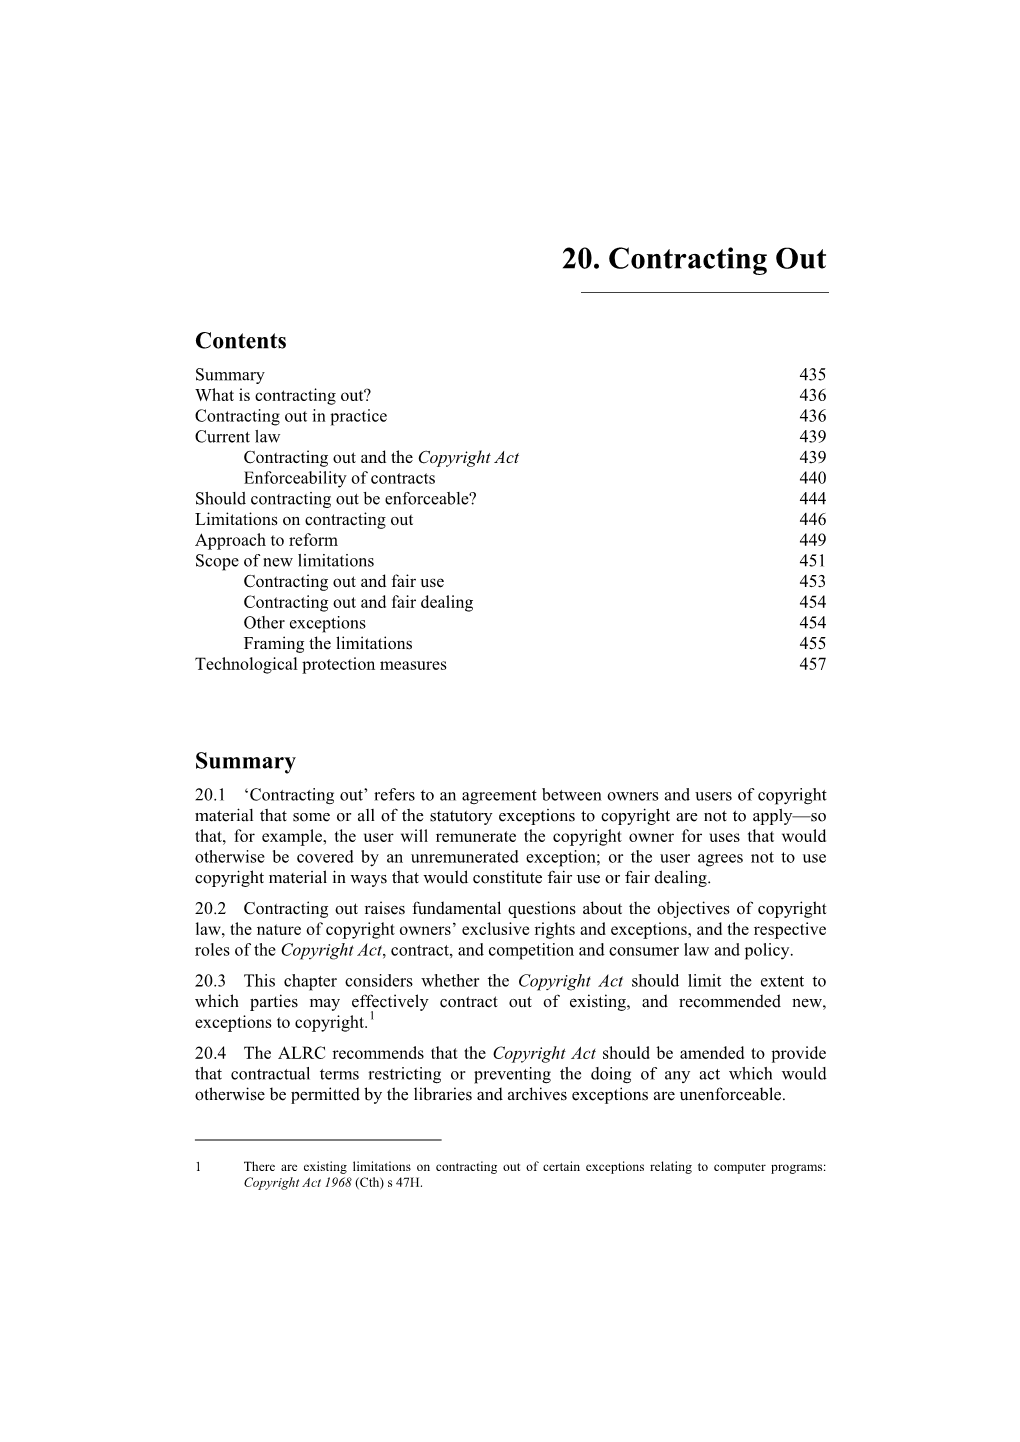 20. Contracting Out